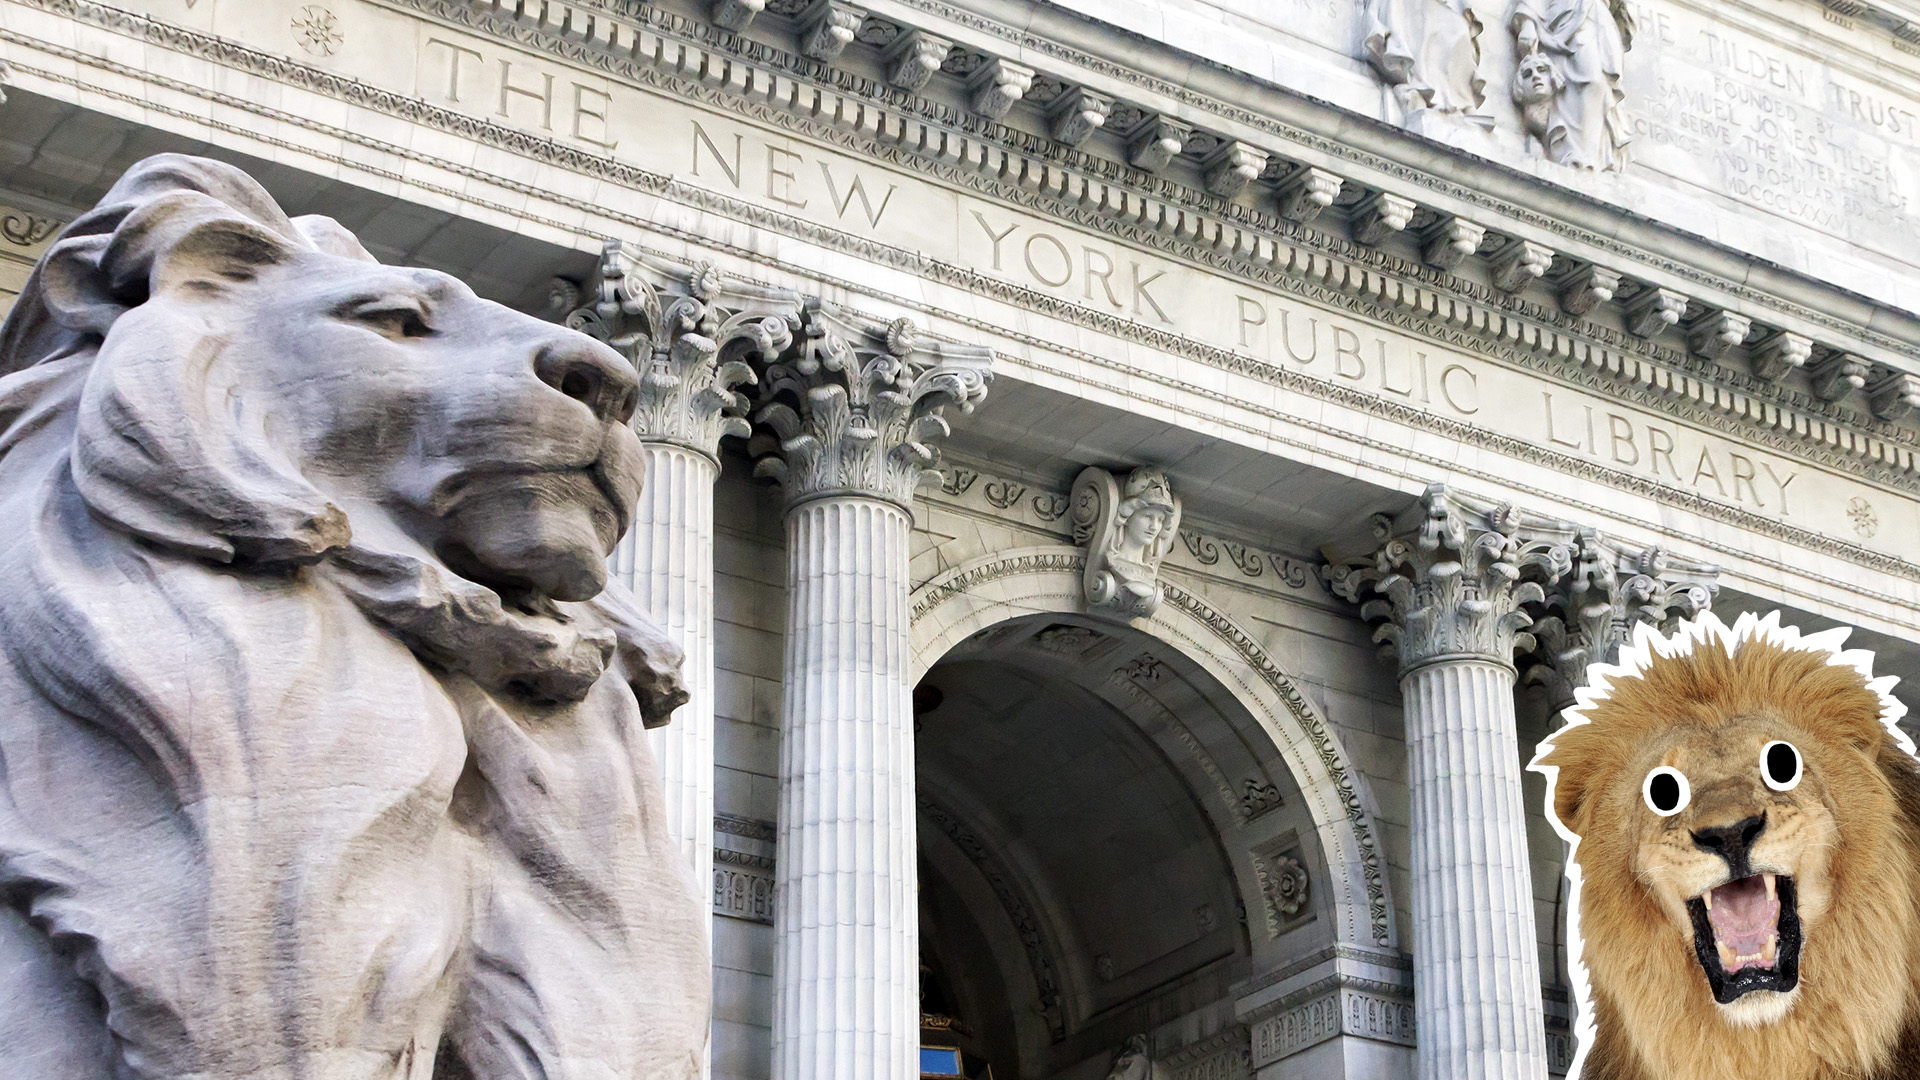 A marble lion outside the New York Public library